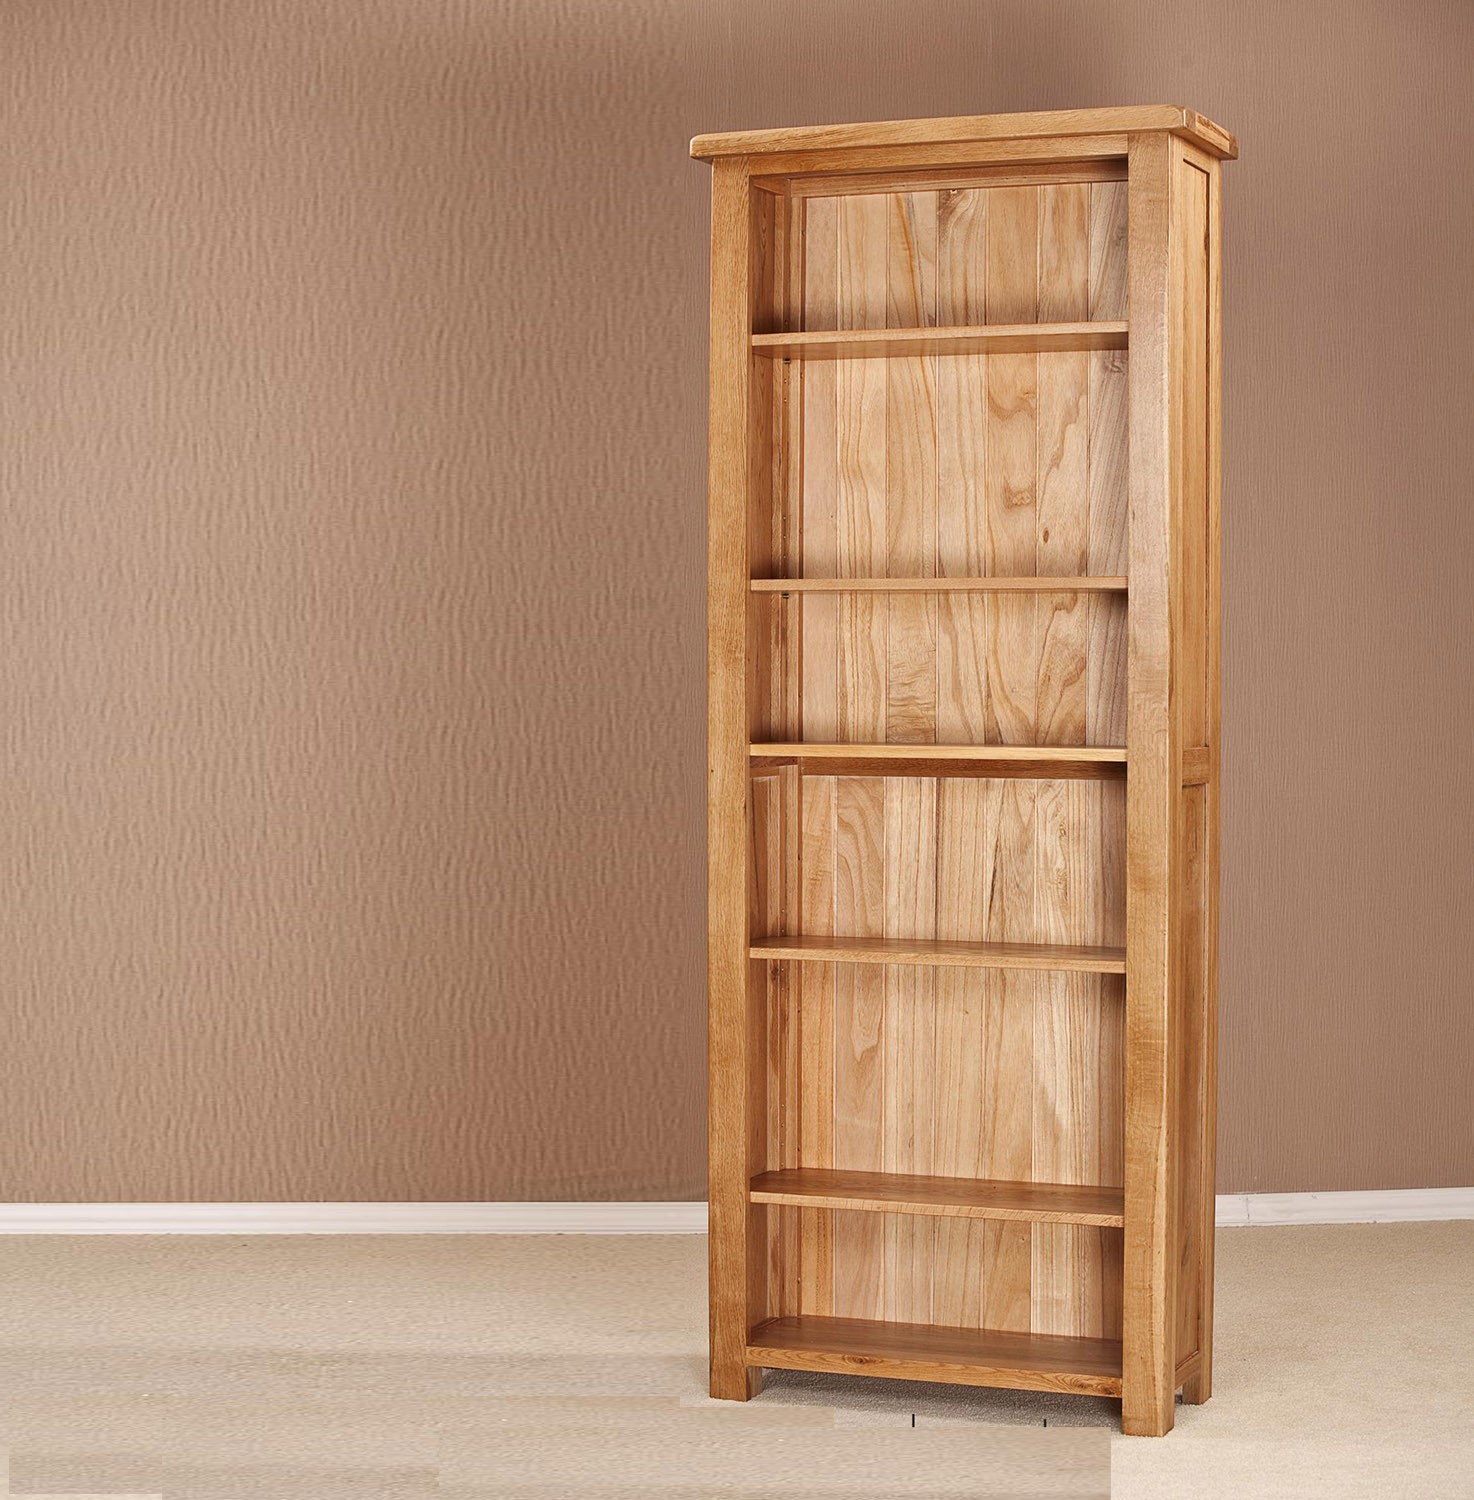 Chic Bookcases Ideas Amish Furniture In Solid Wood solid oak bookcase